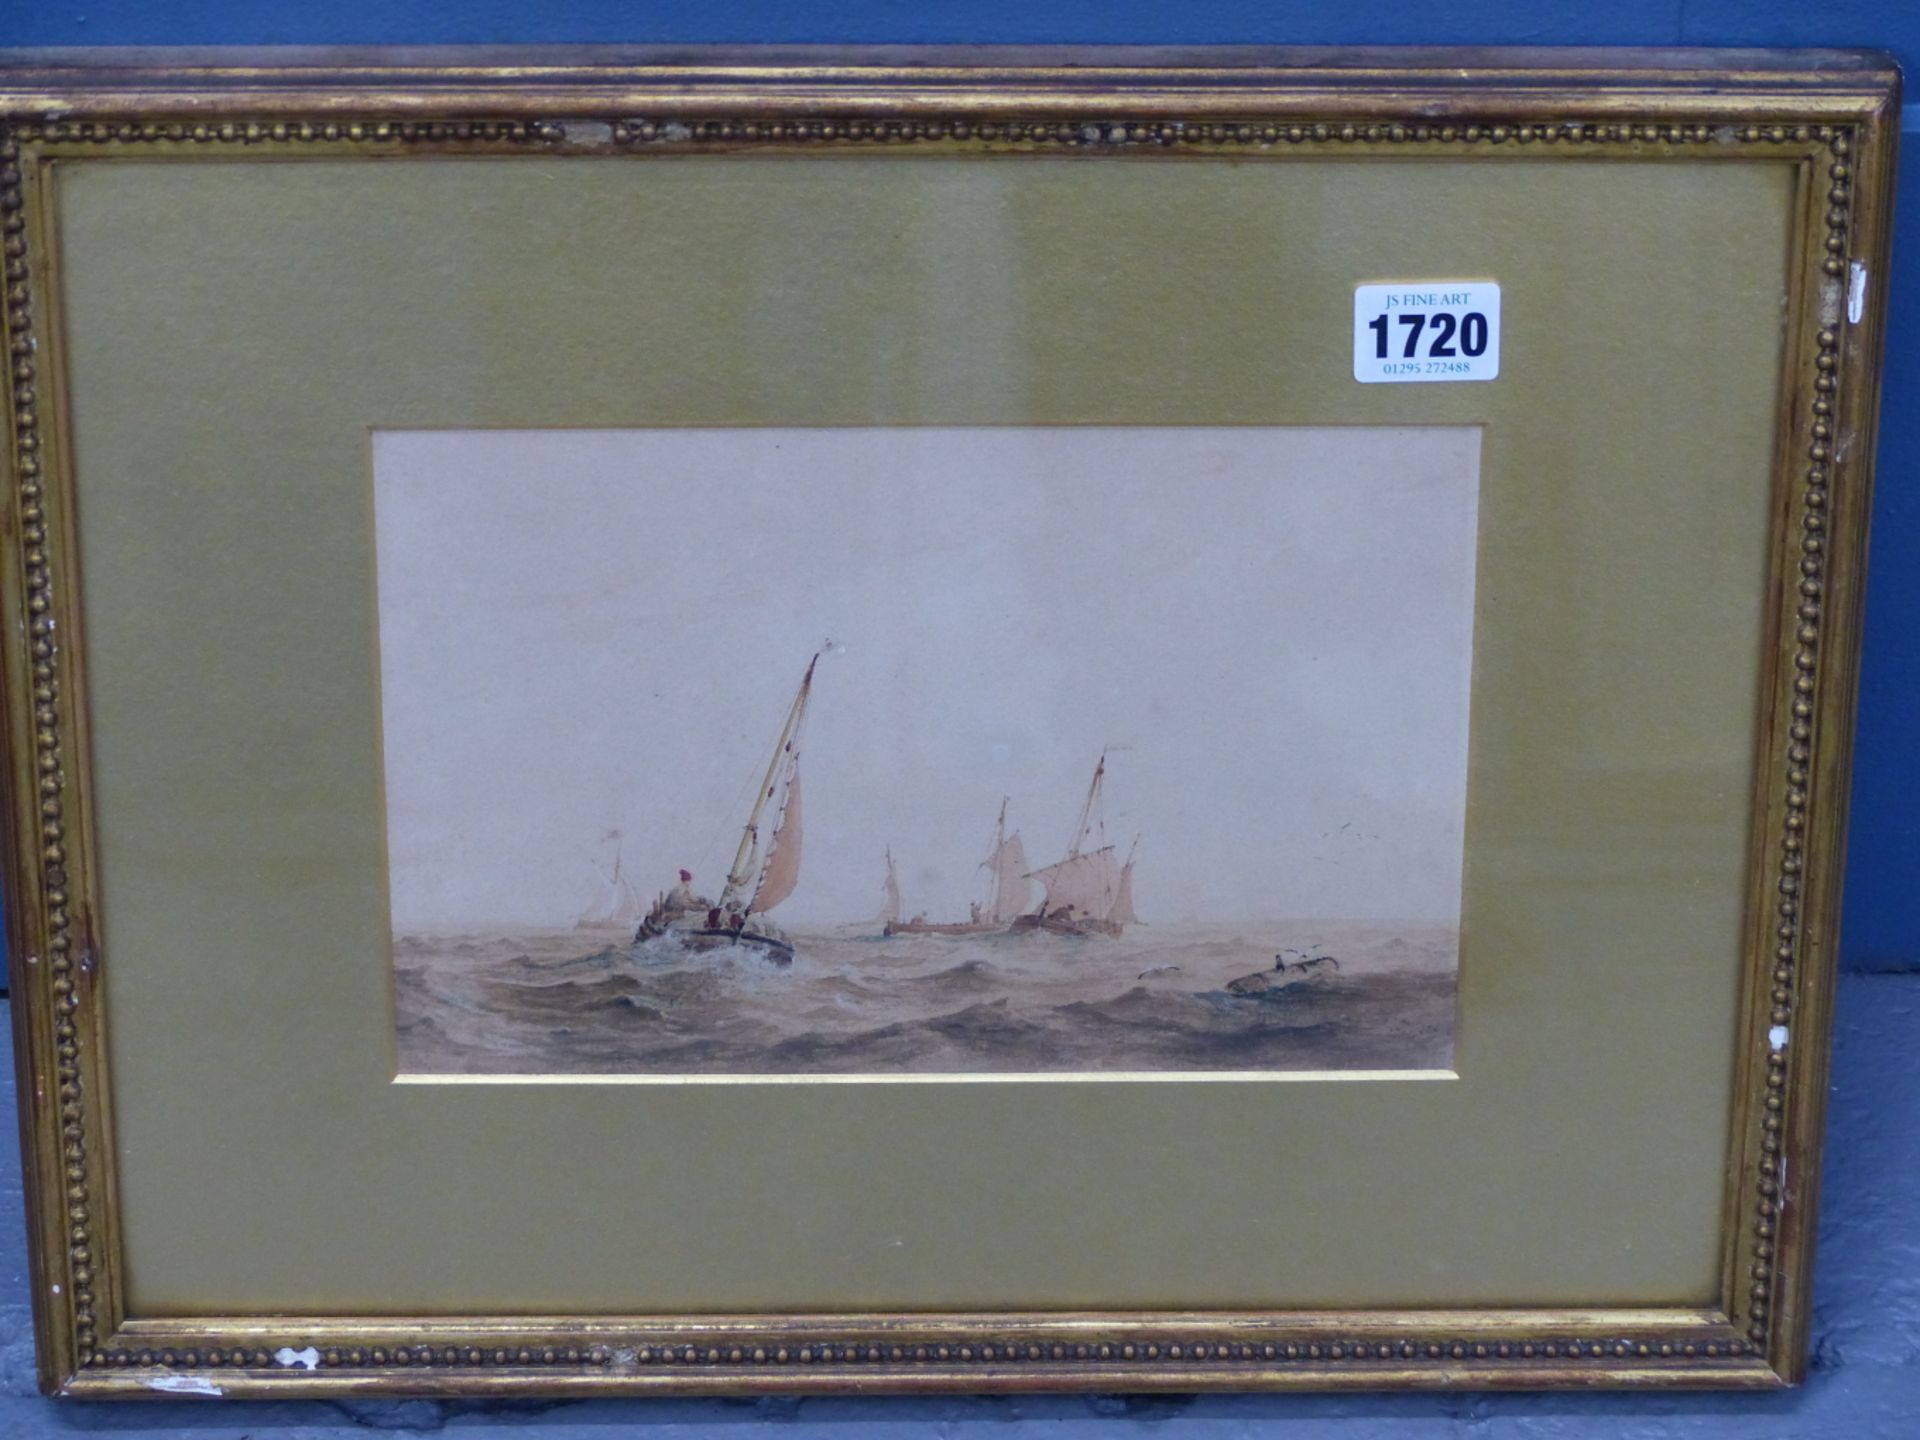 COPLEY- FIELDING (1787-1855) FISHING BOATS. WATERCOLOUR. AGNEWS LABEL AND ATTIBUTION VERSO. 24 X - Image 3 of 6